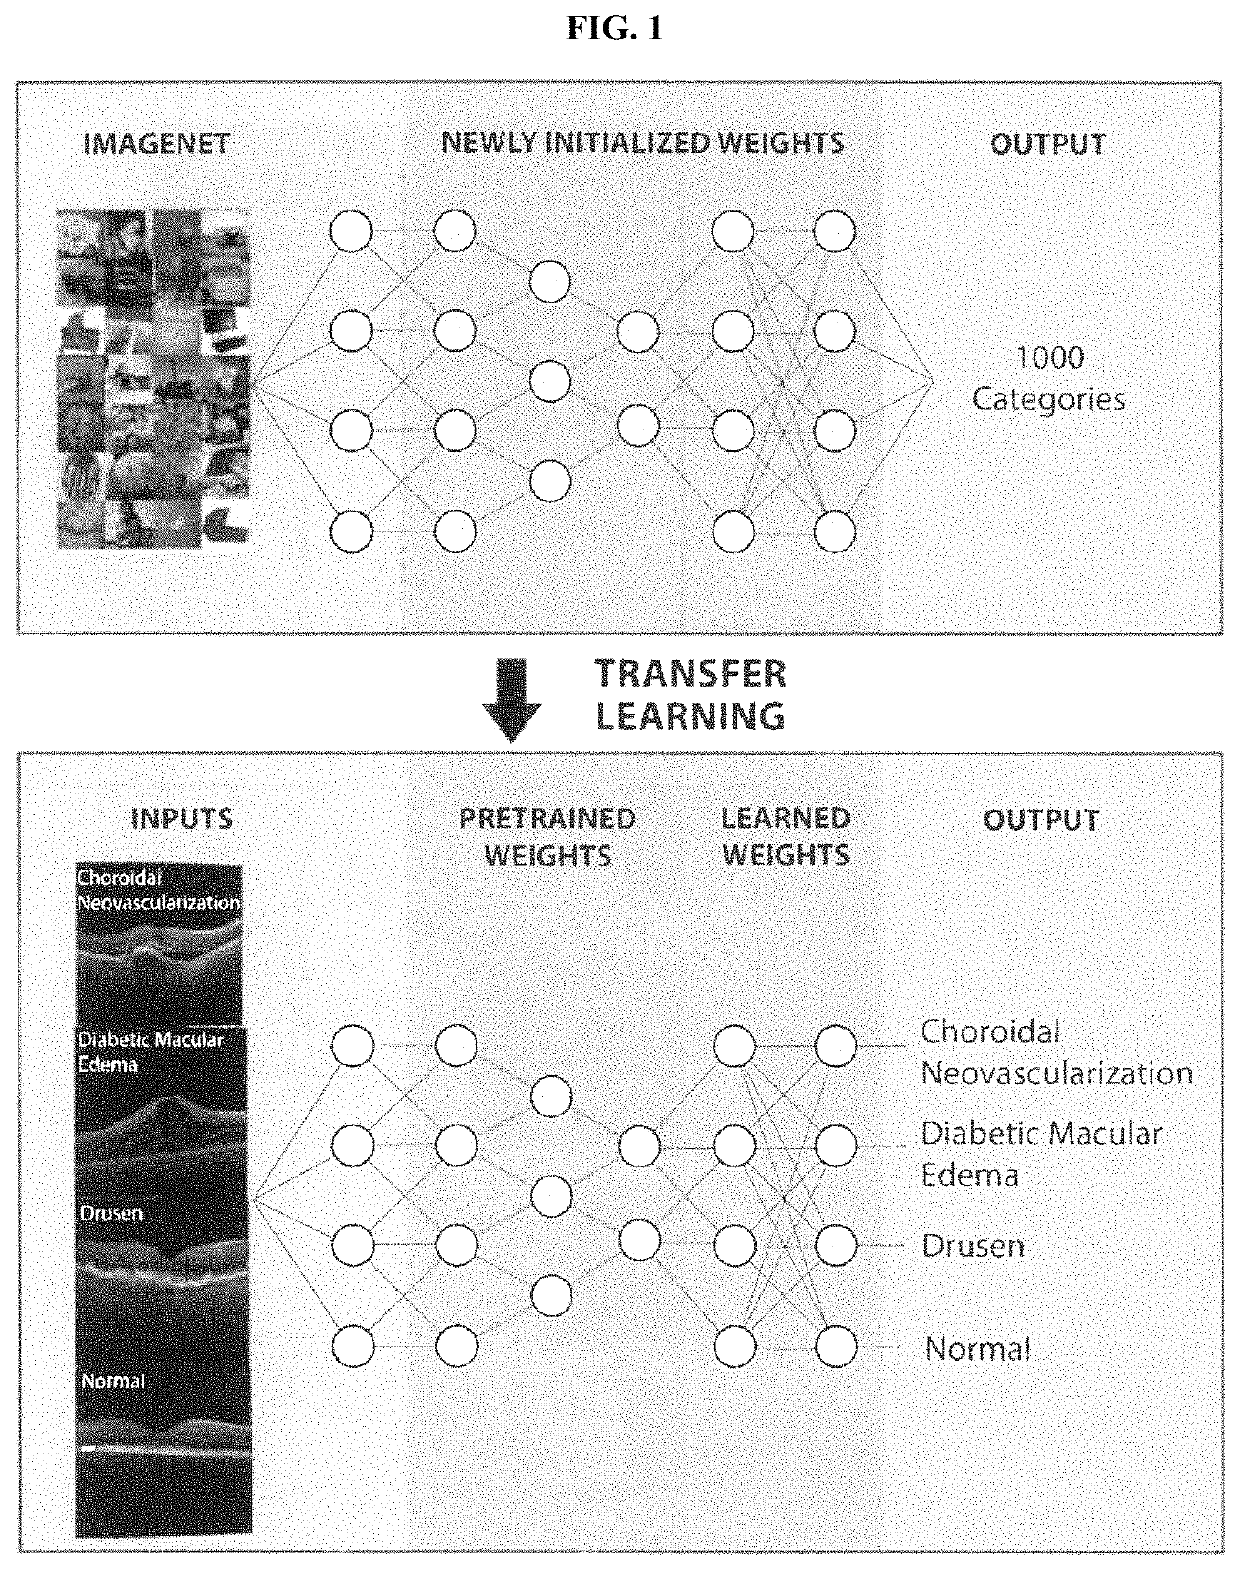 Deep learning-based diagnosis and referral of ophthalmic diseases and disorders